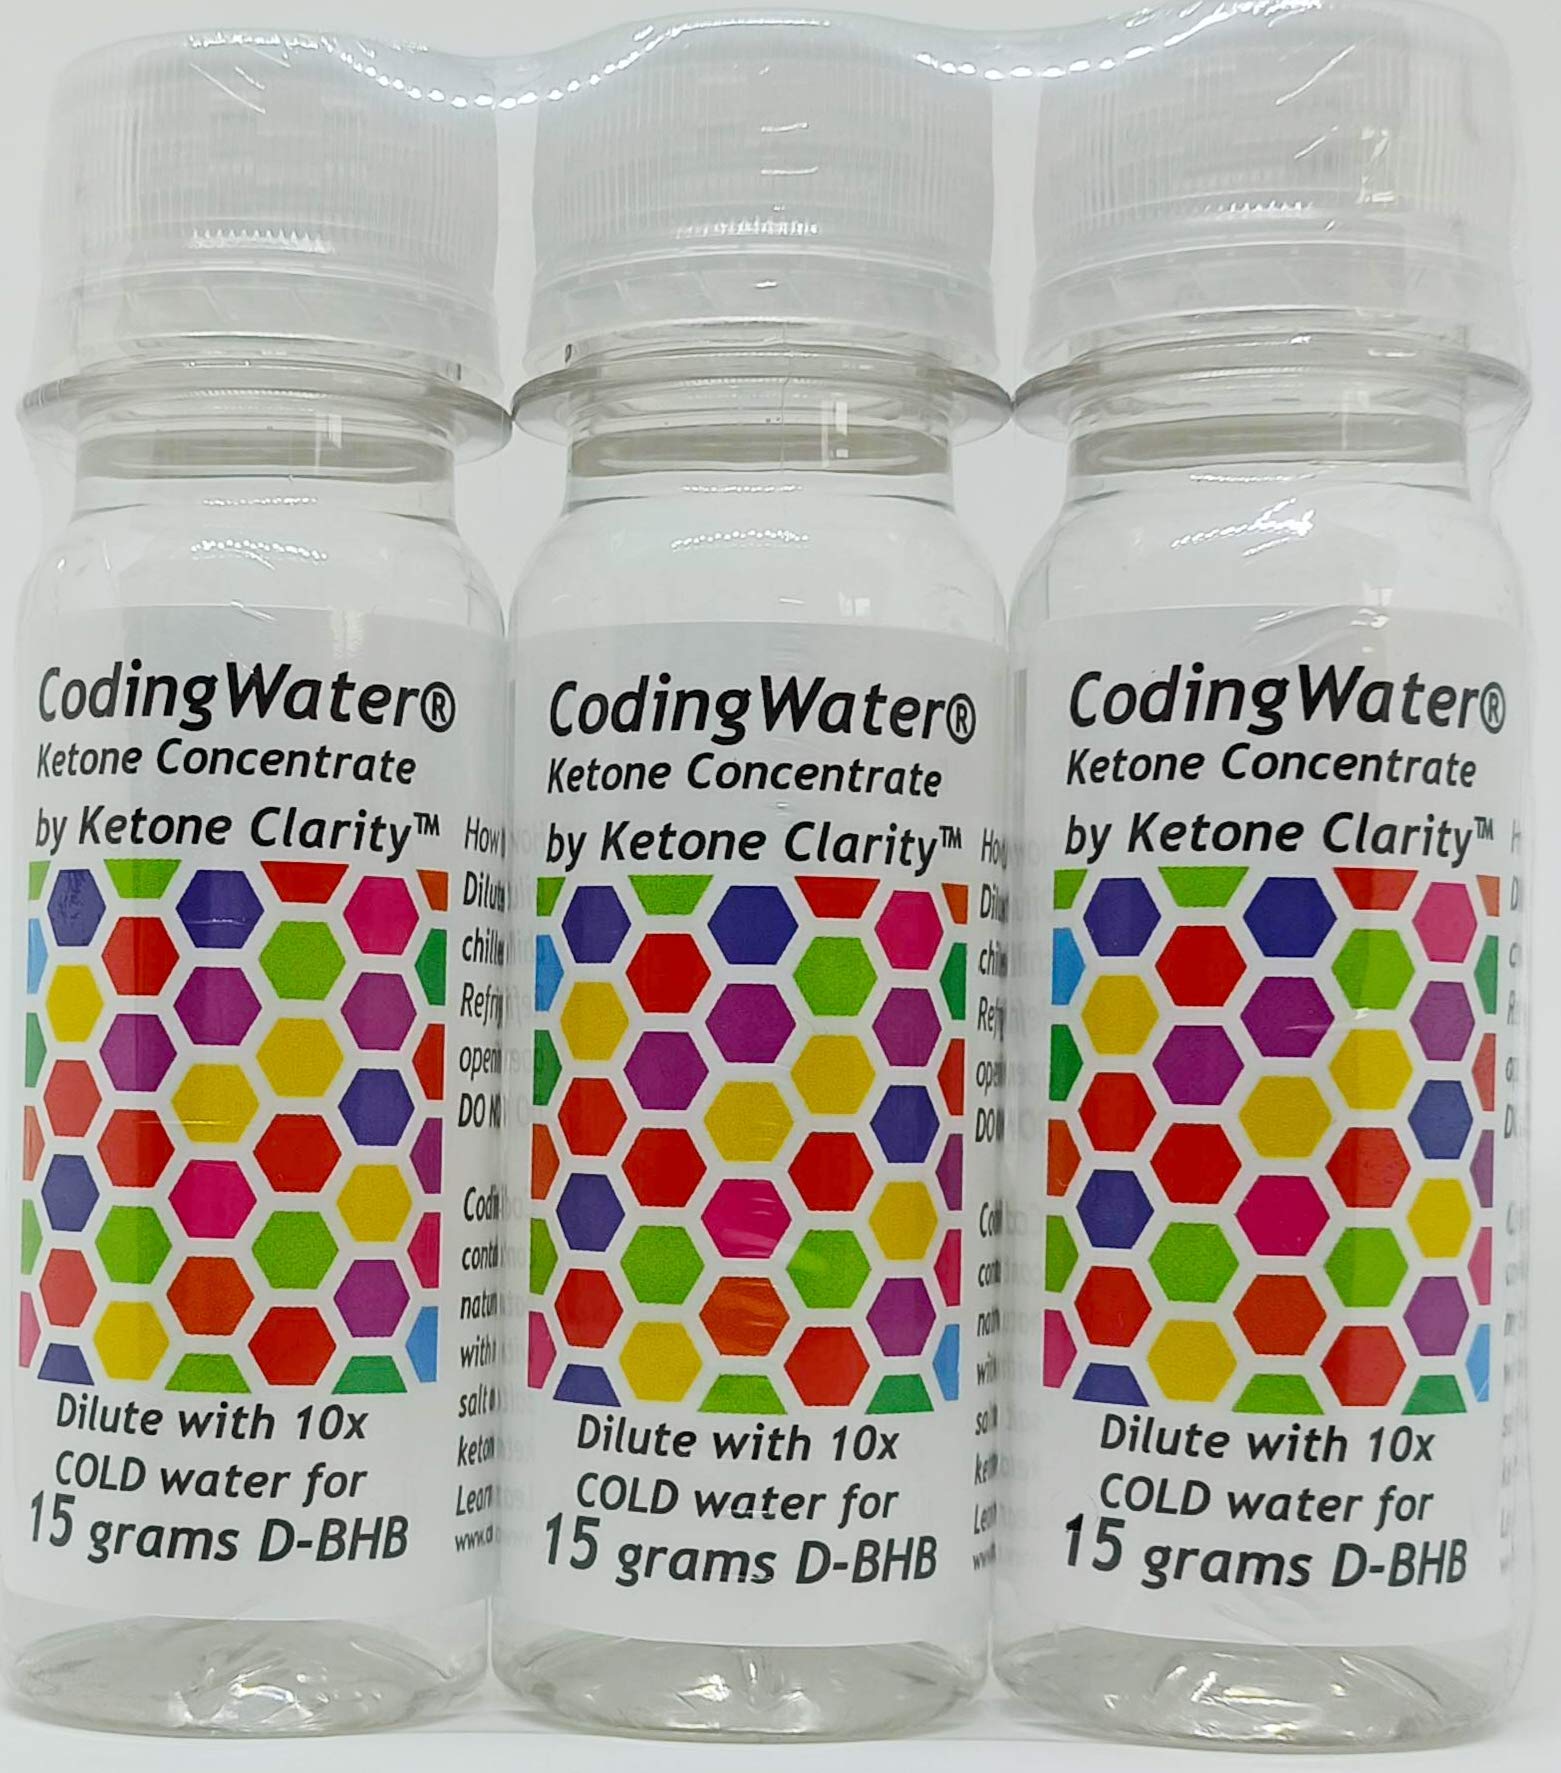 CodingWater® 15g D-BHB Ketone Supplement 3 Pack. World’s First 15g Natural D-BHB Ketone Concentrate with Great Taste, NOT a Ketone Salt & NOT a Syn...